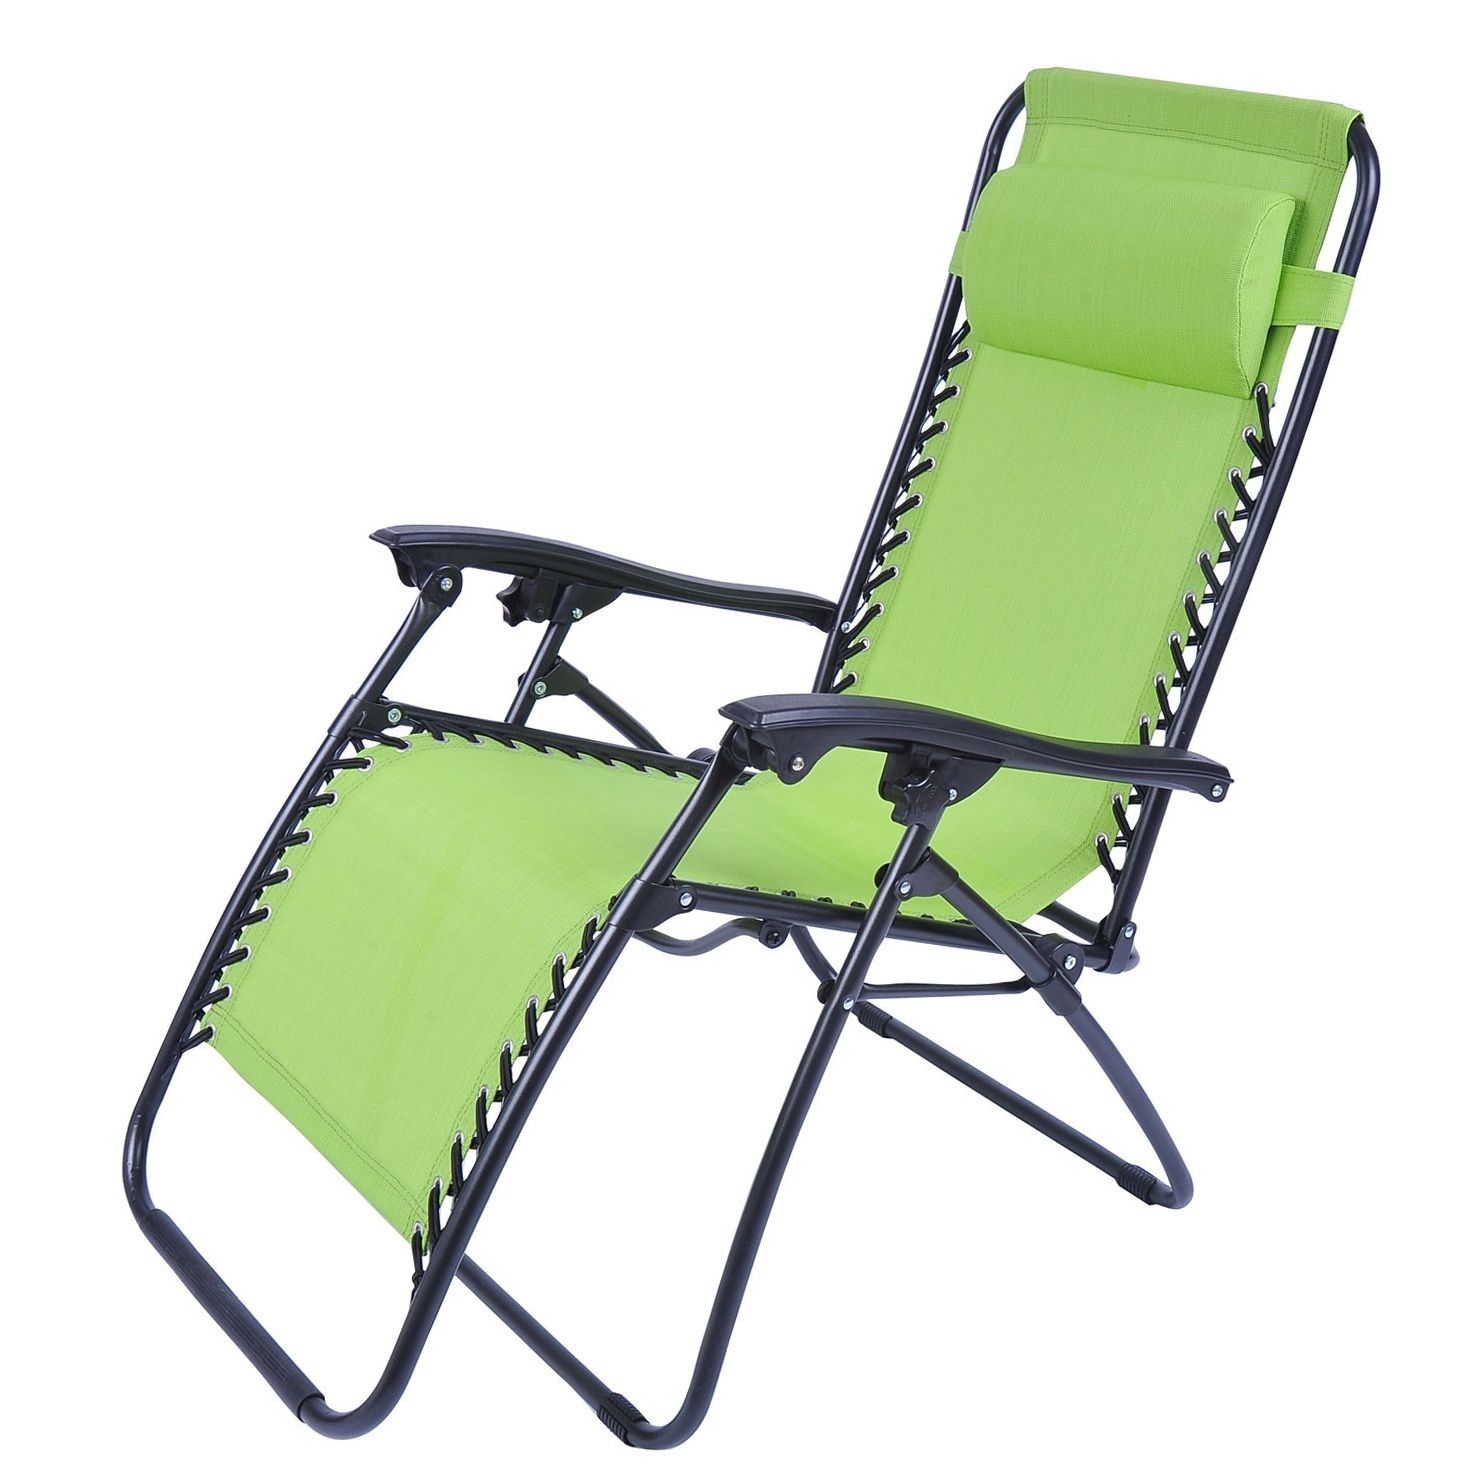 Beach Chaise Lounges Intended For Most Up To Date Folding Chaise Lounge Chair Patio Outdoor Pool Beach Lawn Recliner (View 10 of 15)